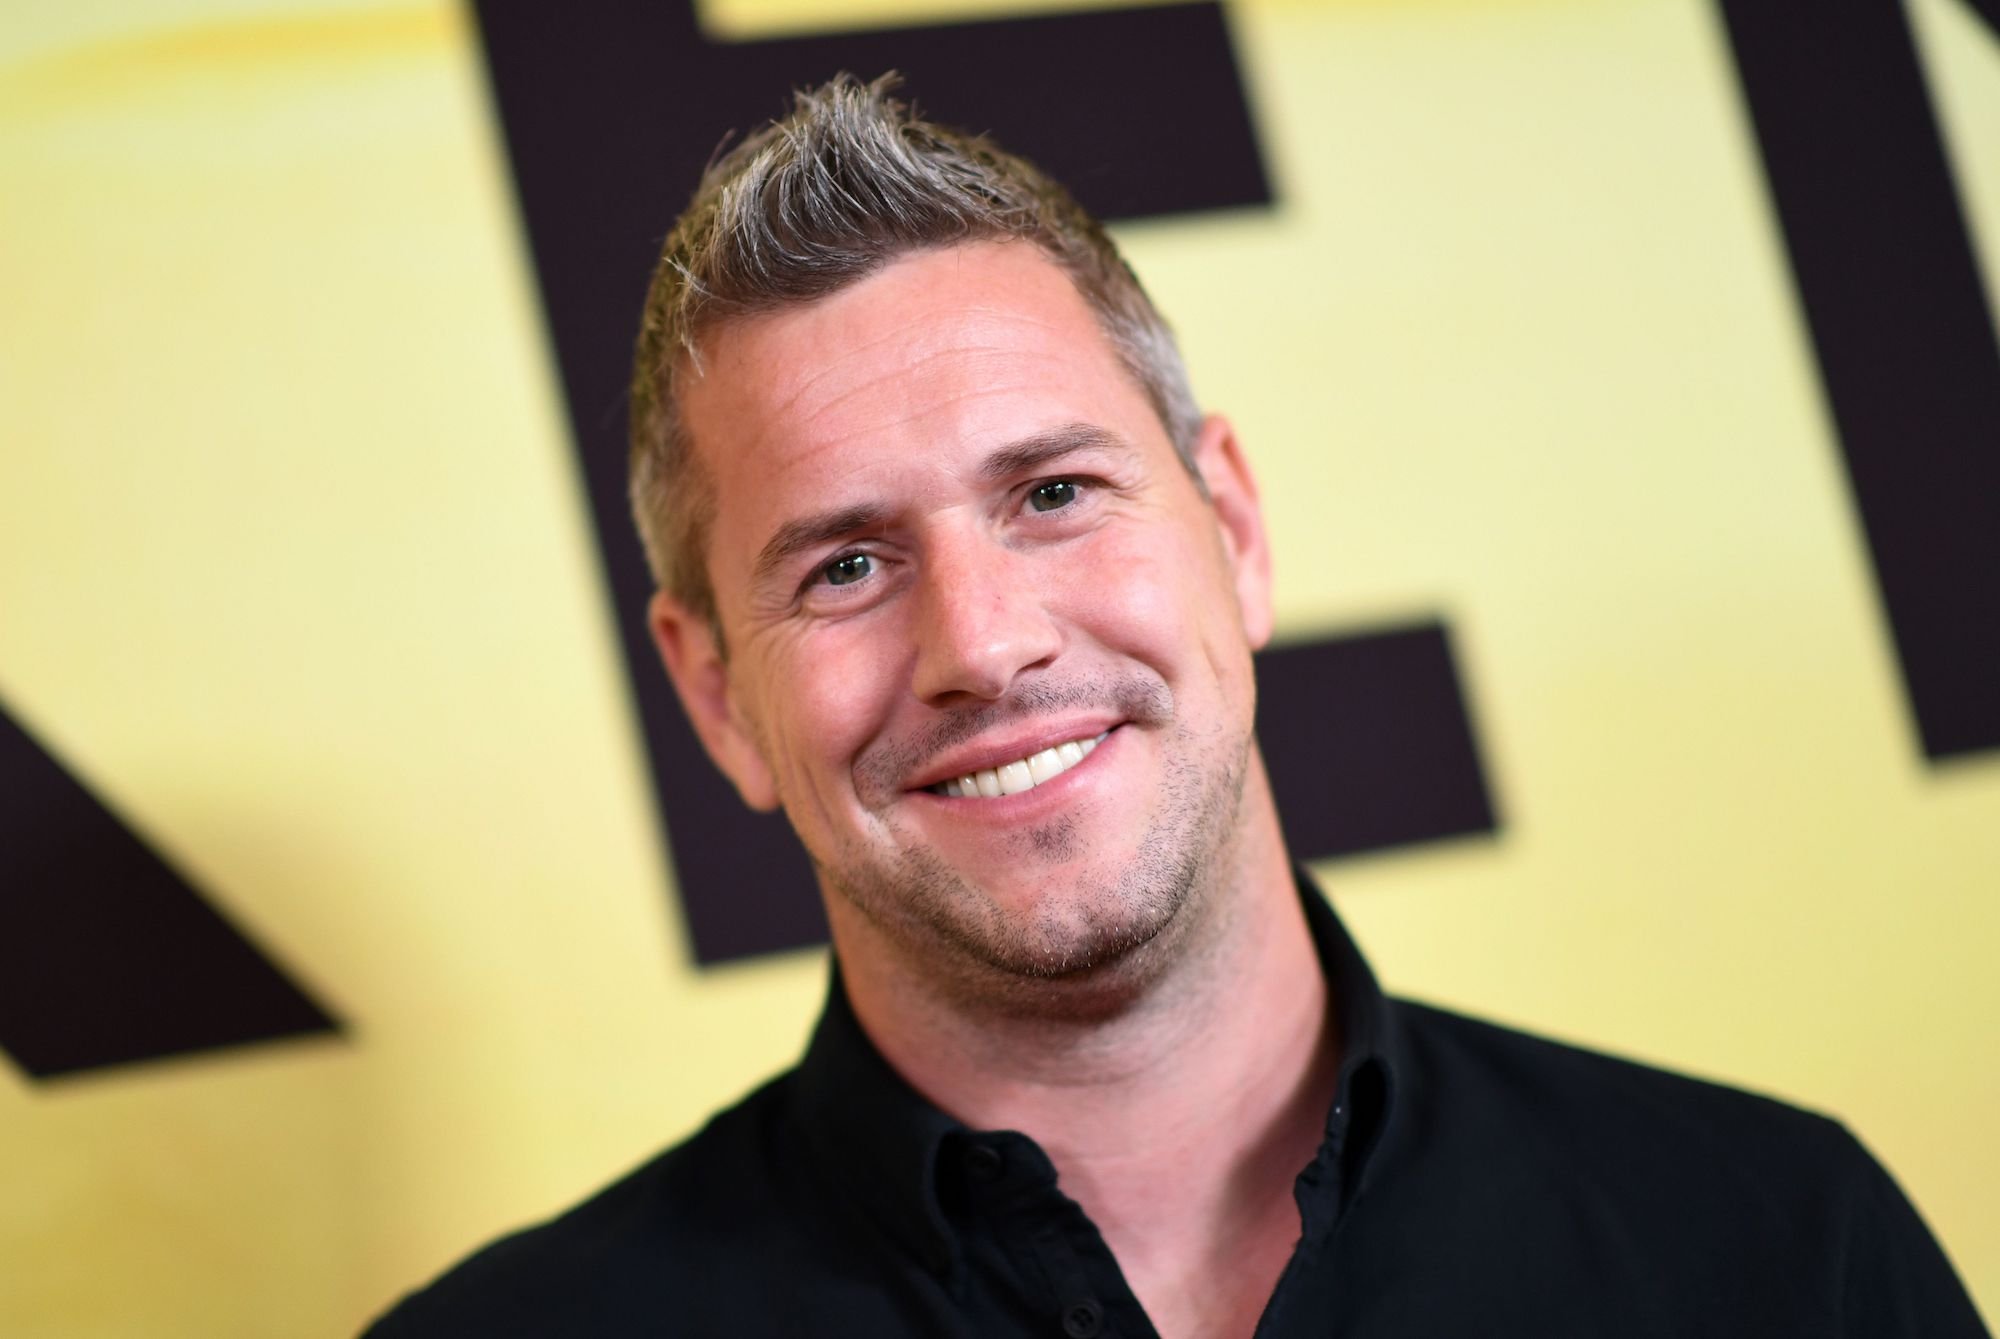 Ant Anstead smiling in front of a yellow background